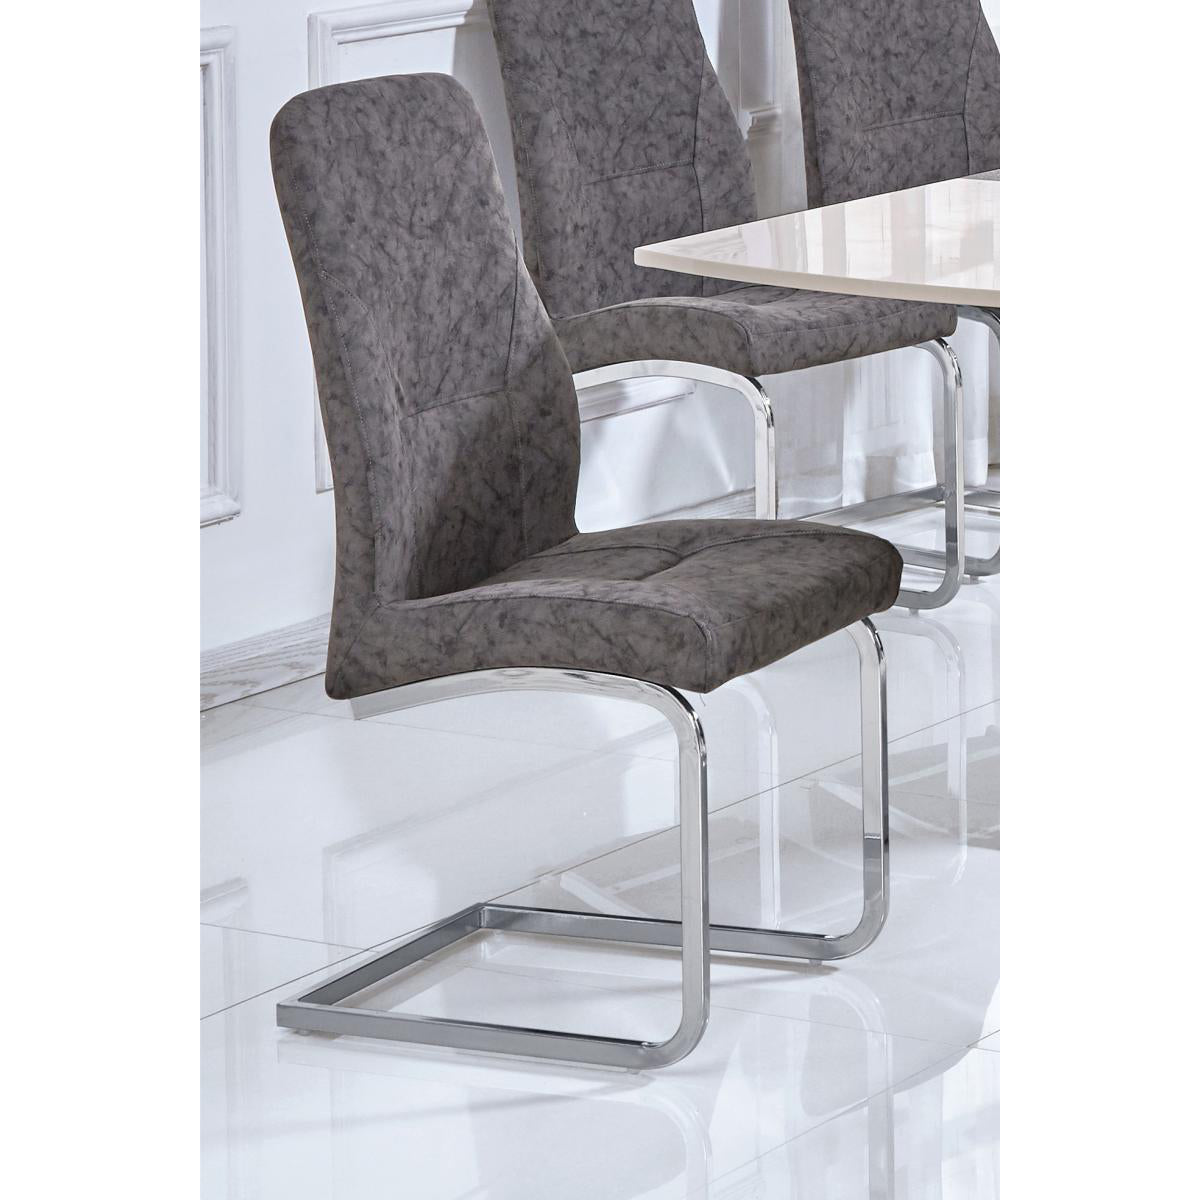 Belarus Patterned PU Chair Chrome And Grey